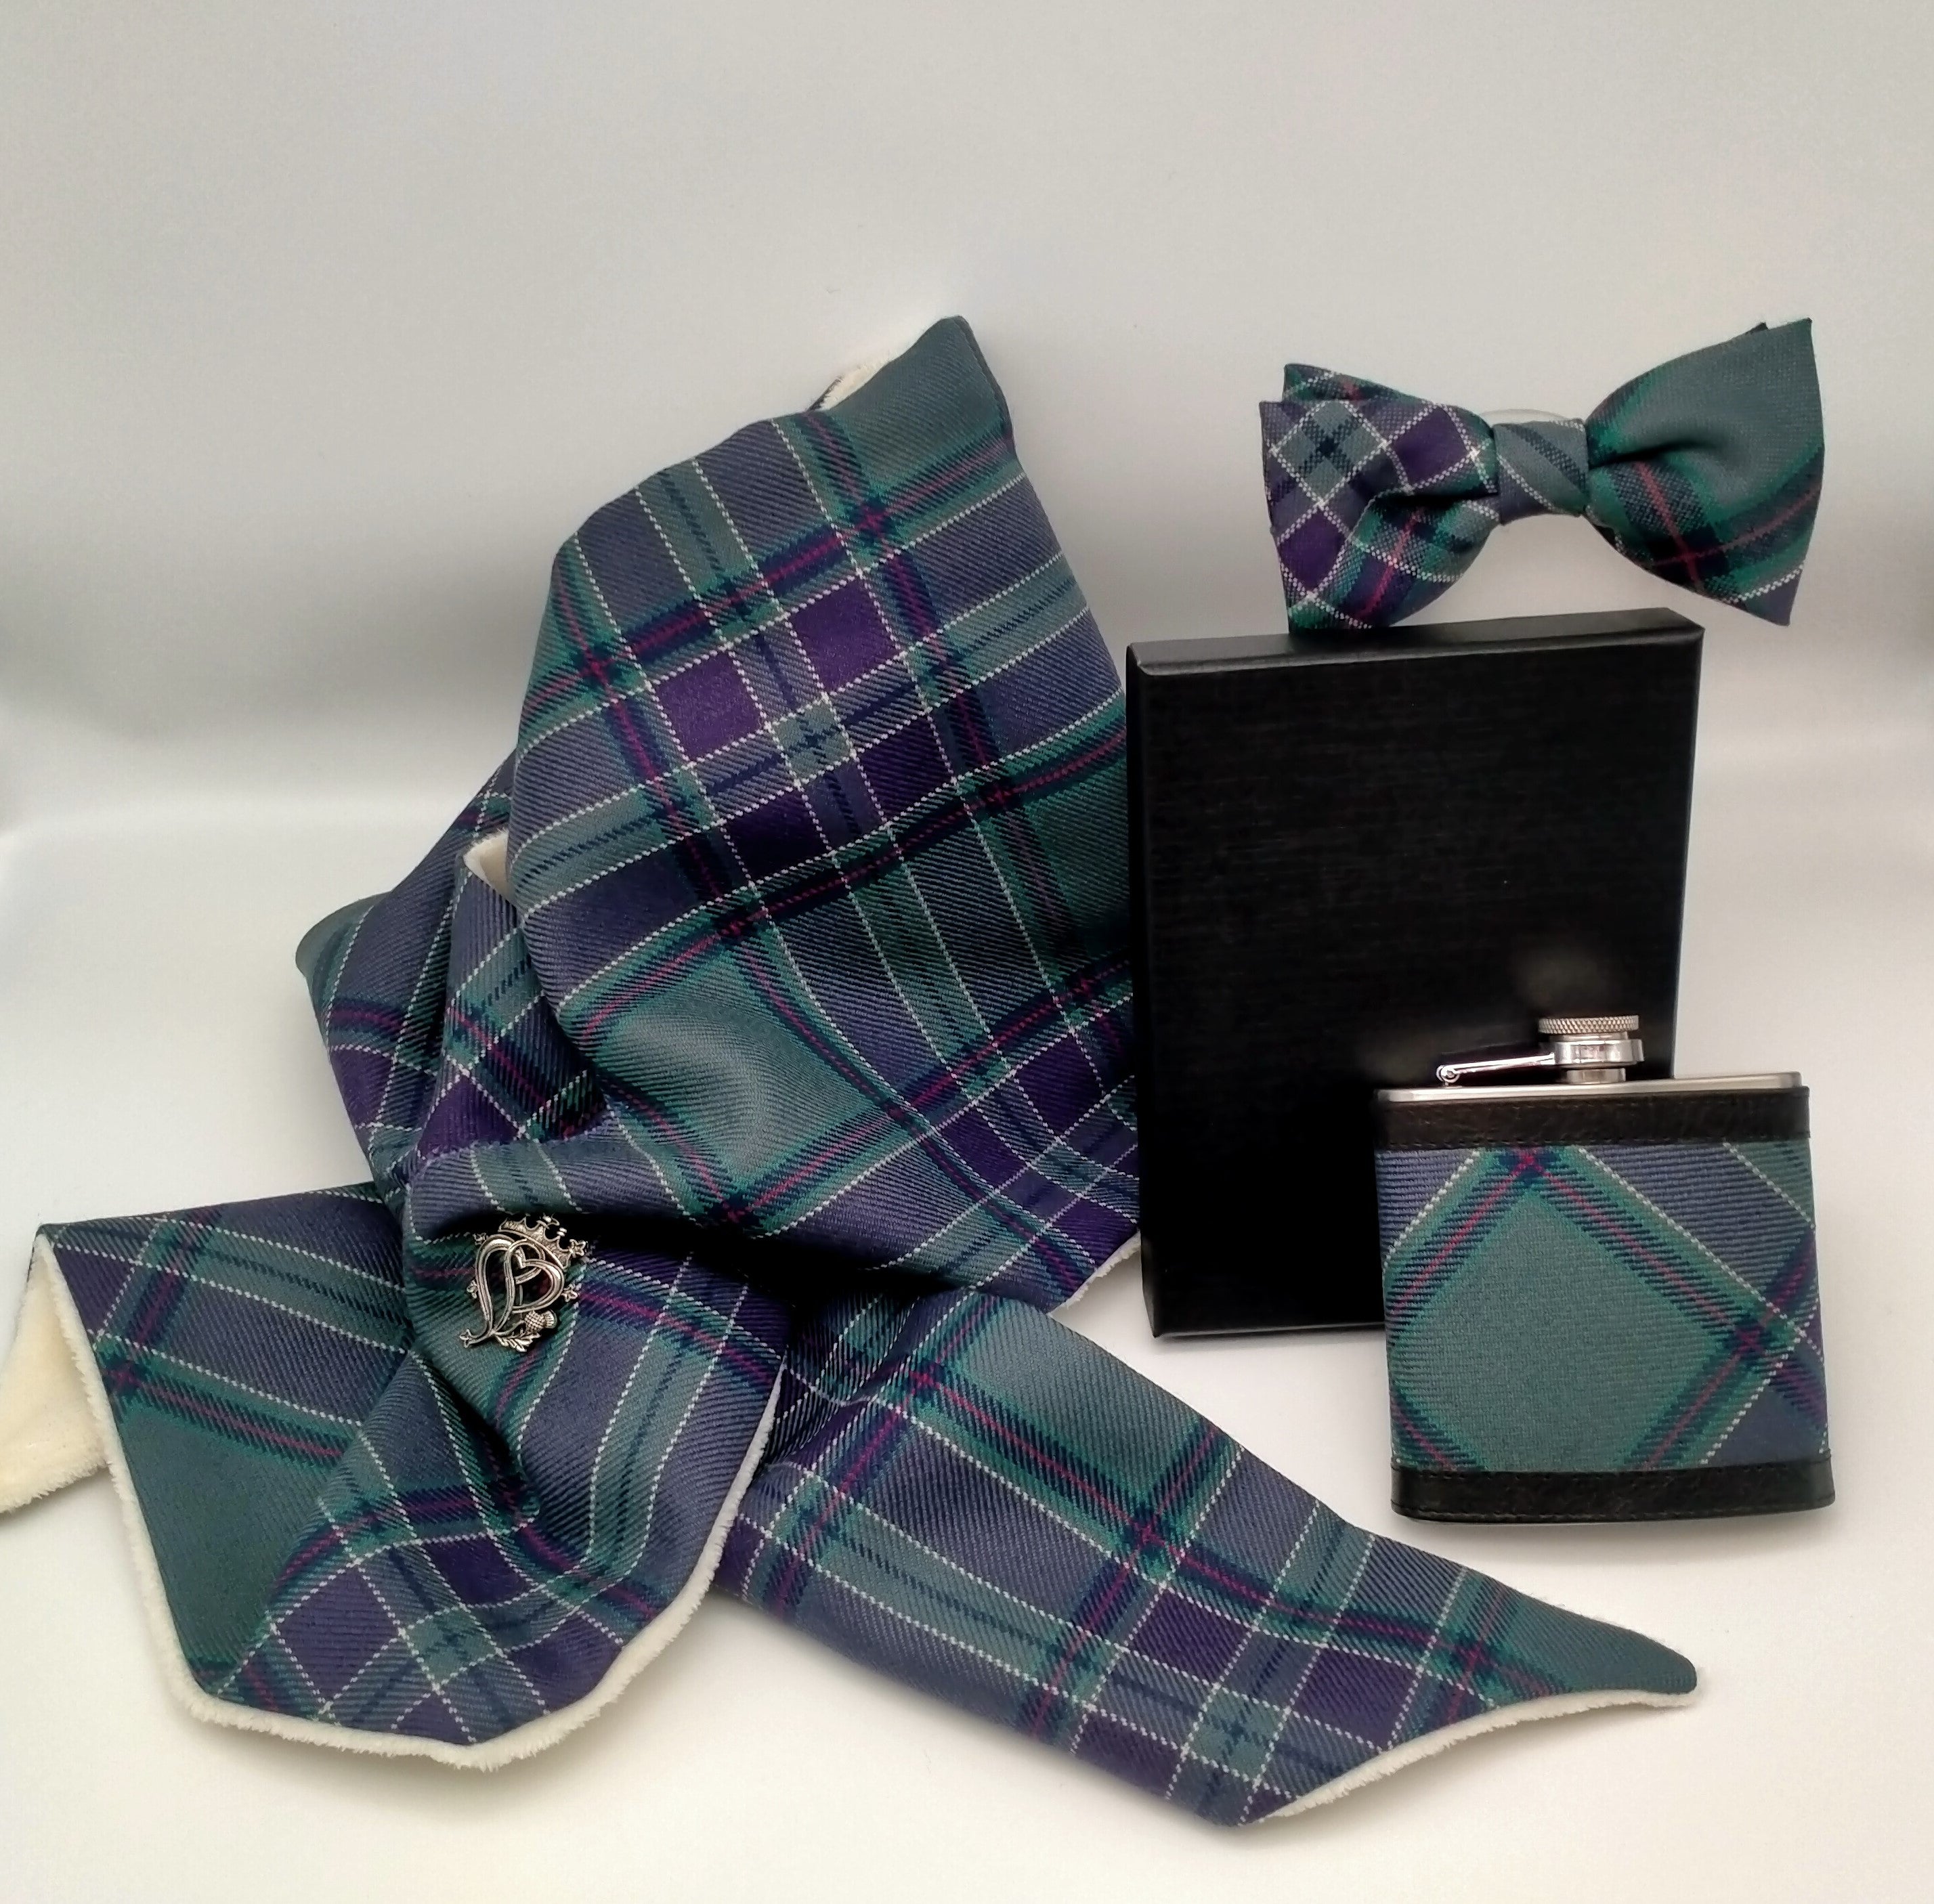 An image showing a scarf, a bow-tie and a hip flask in the Scottish Parliament tartant arranged together.